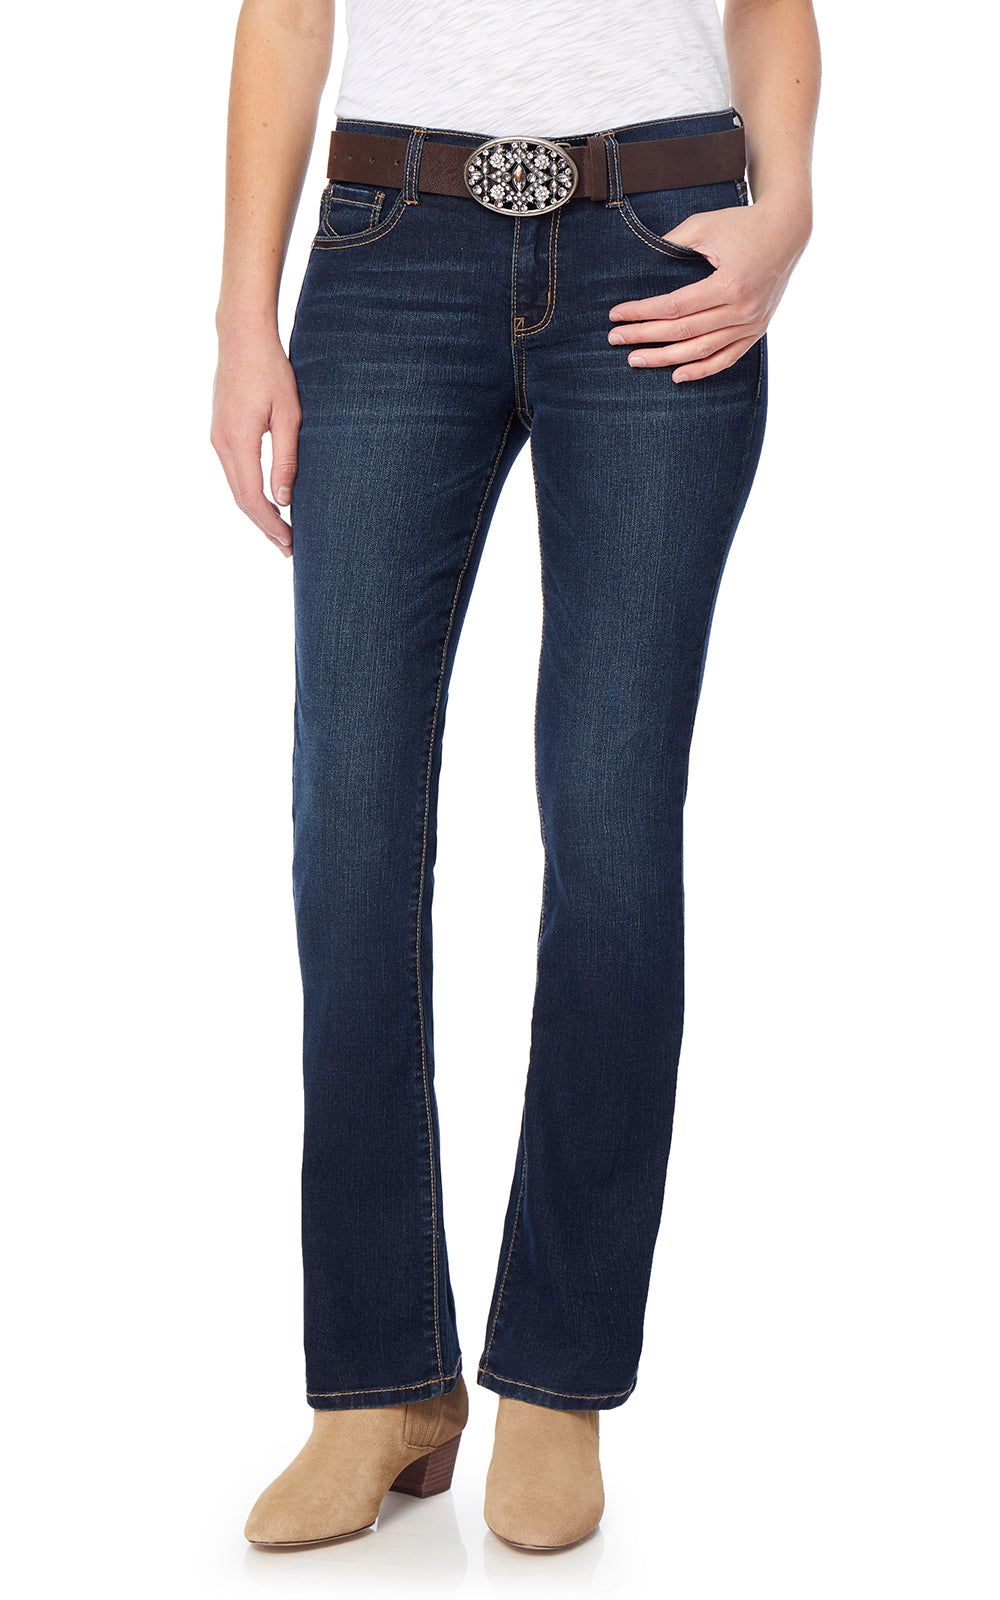 Shop these Walmart bootcut flare jeans for only $29 on my